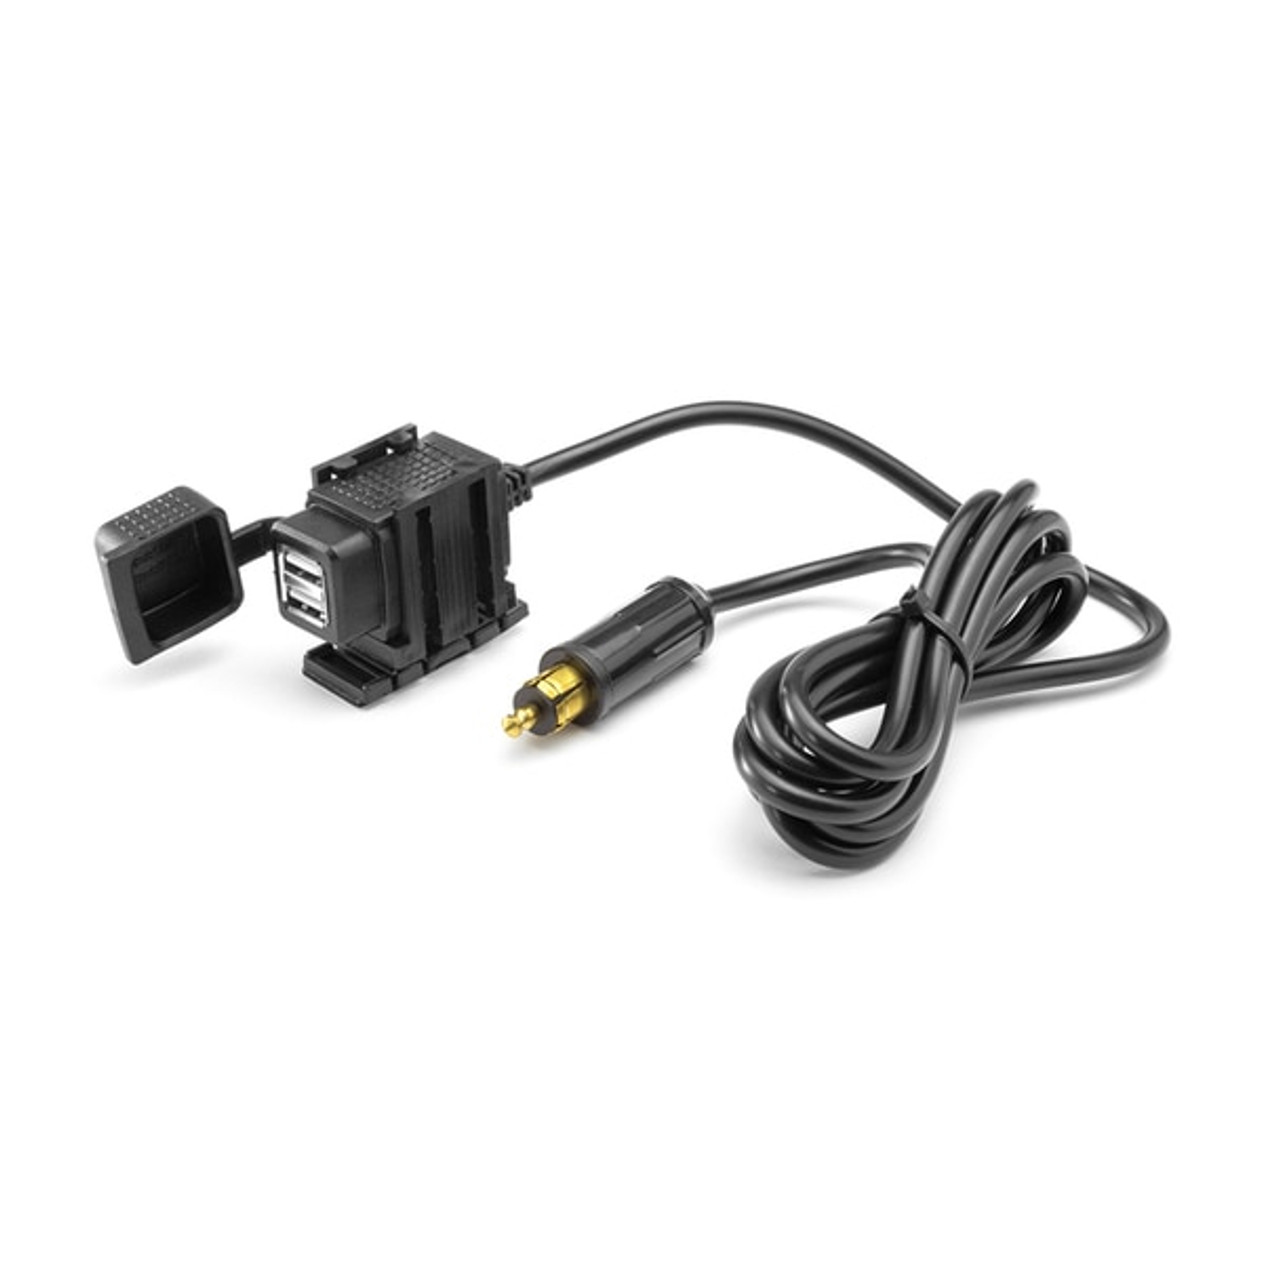 For DIN Hella Powerlet Plug to Dual USB Charger Adapter Voltmeter